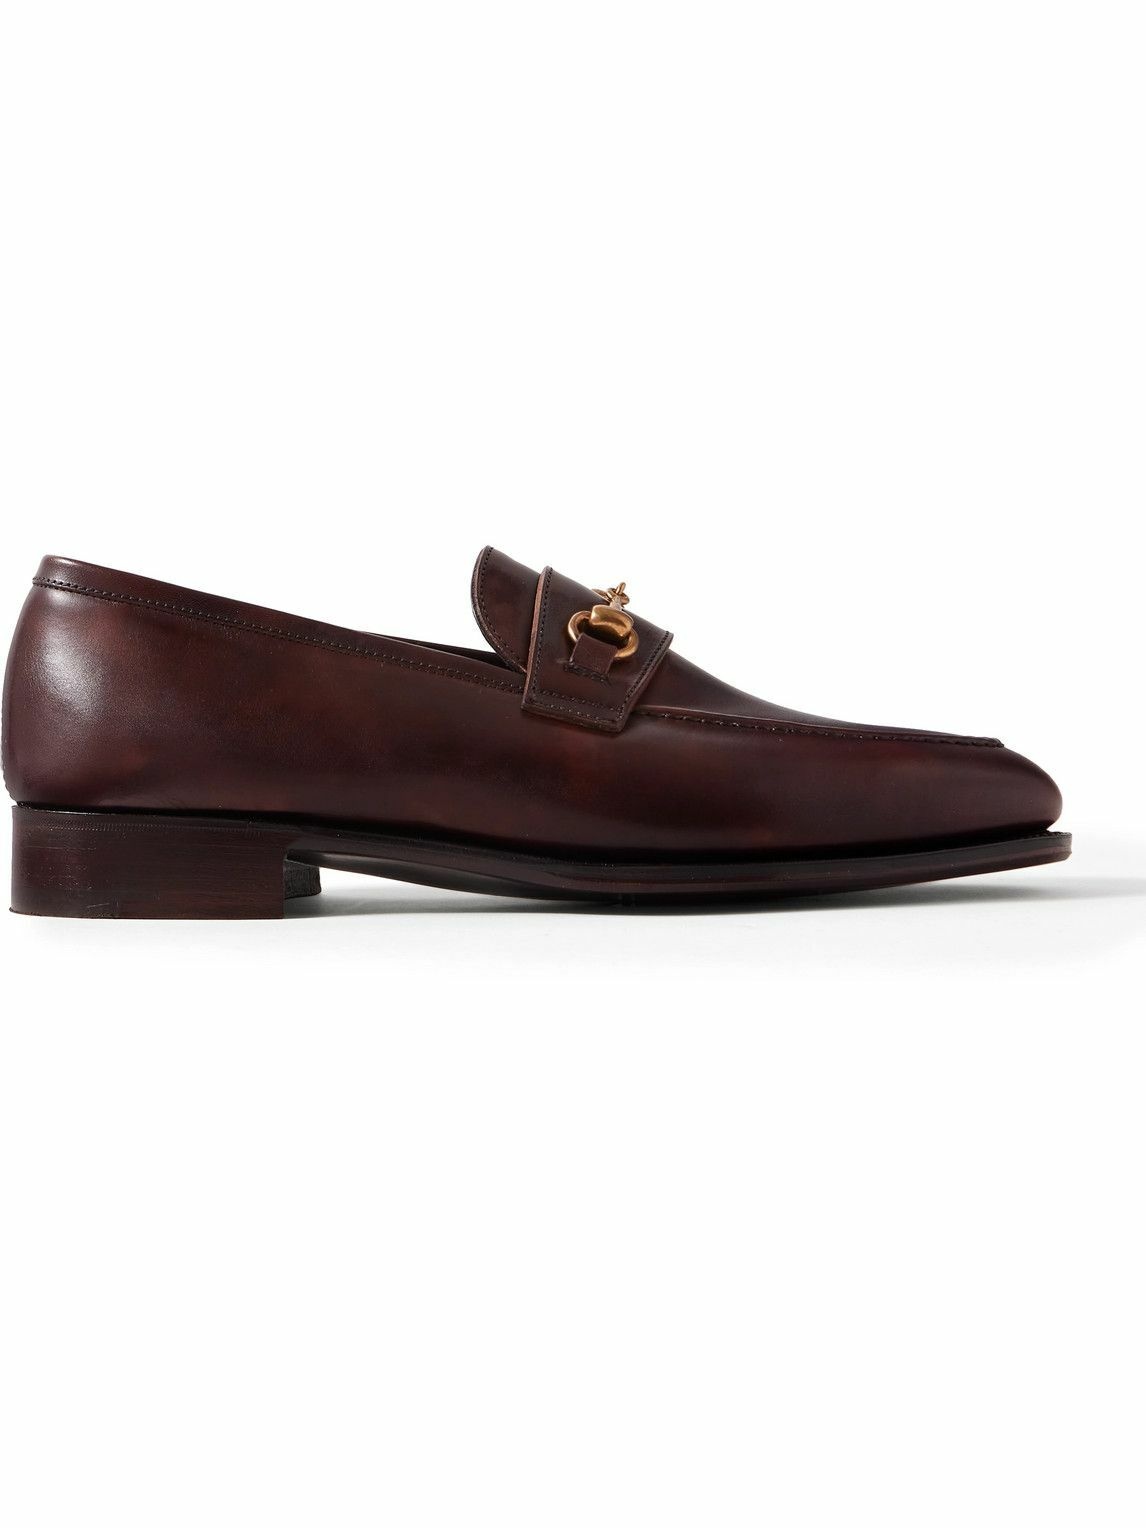 Photo: George Cleverley - Colony Horsebit Leather Loafers - Brown